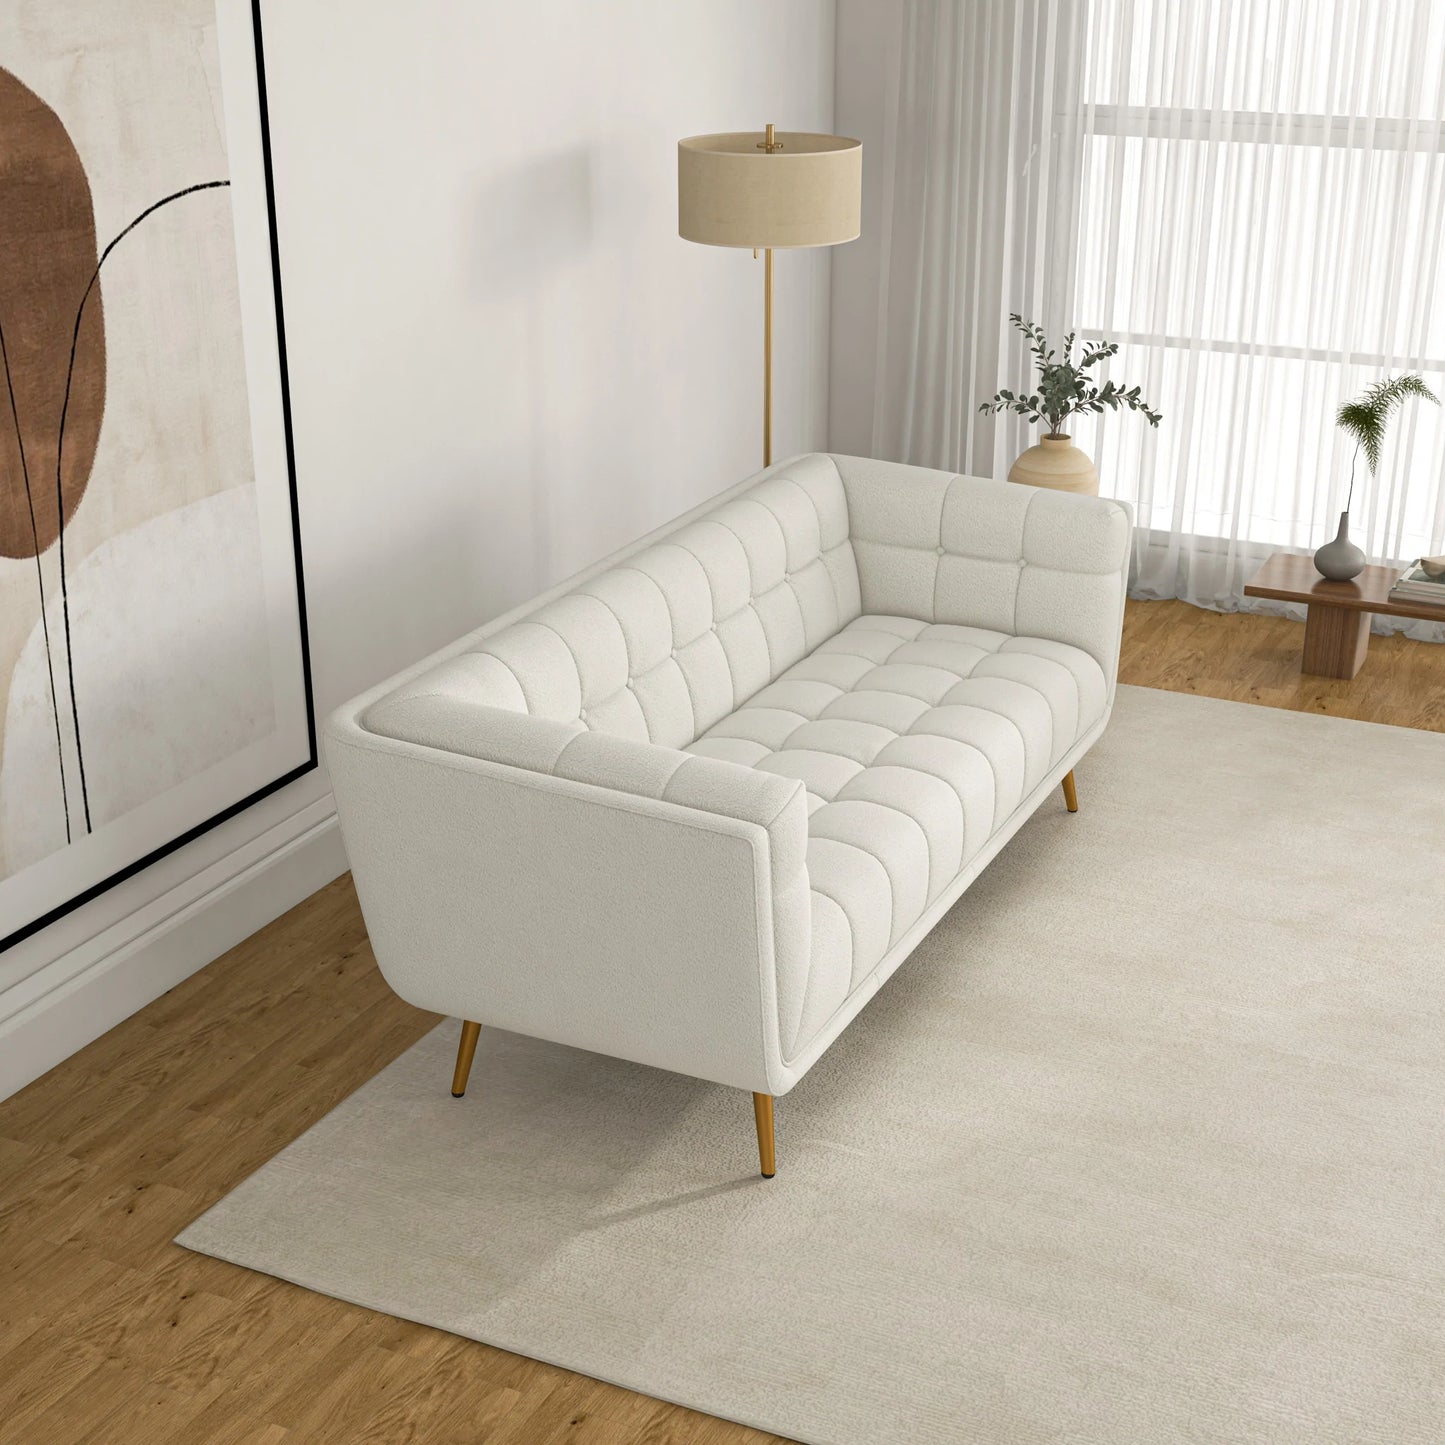 Kano Sofa (Large - Beige Boucle with Metal Feet)